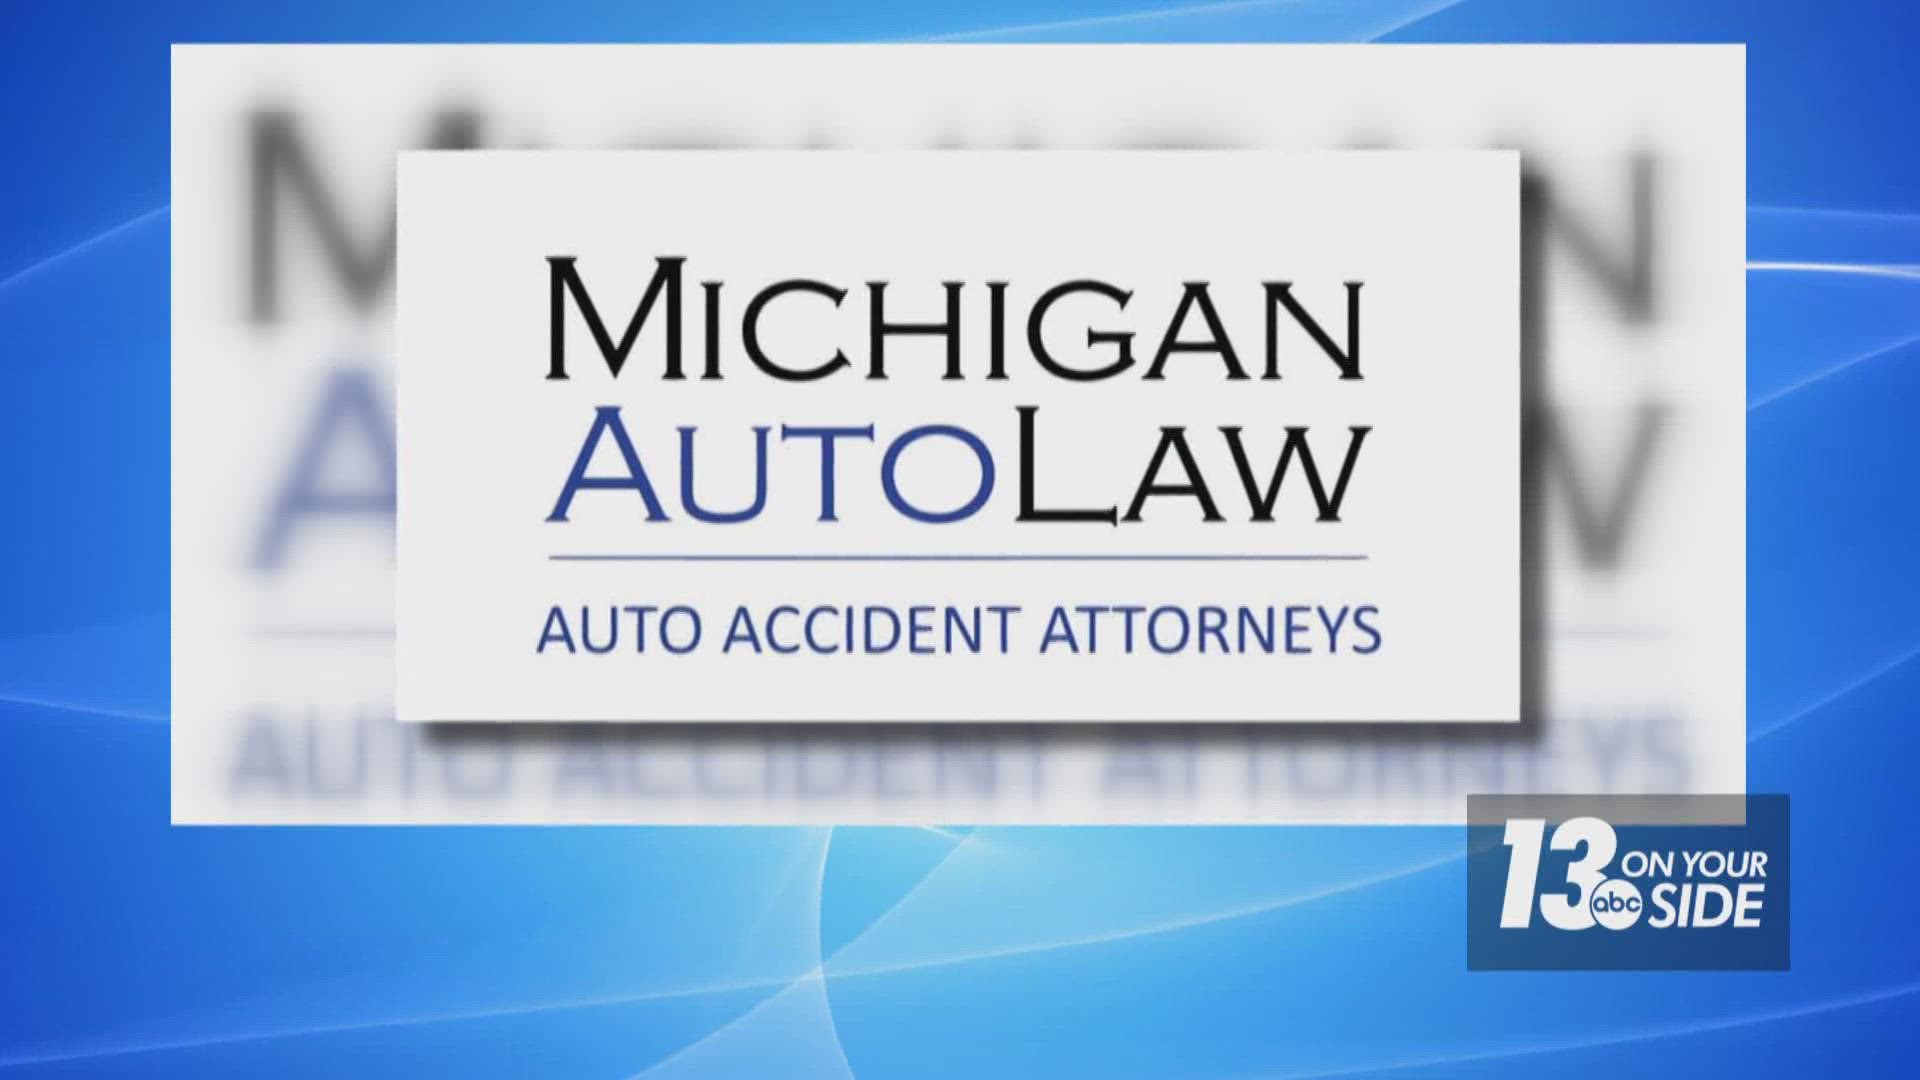 We asked Michigan Auto Law attorney Brandon Hewitt to help us sort it all out.